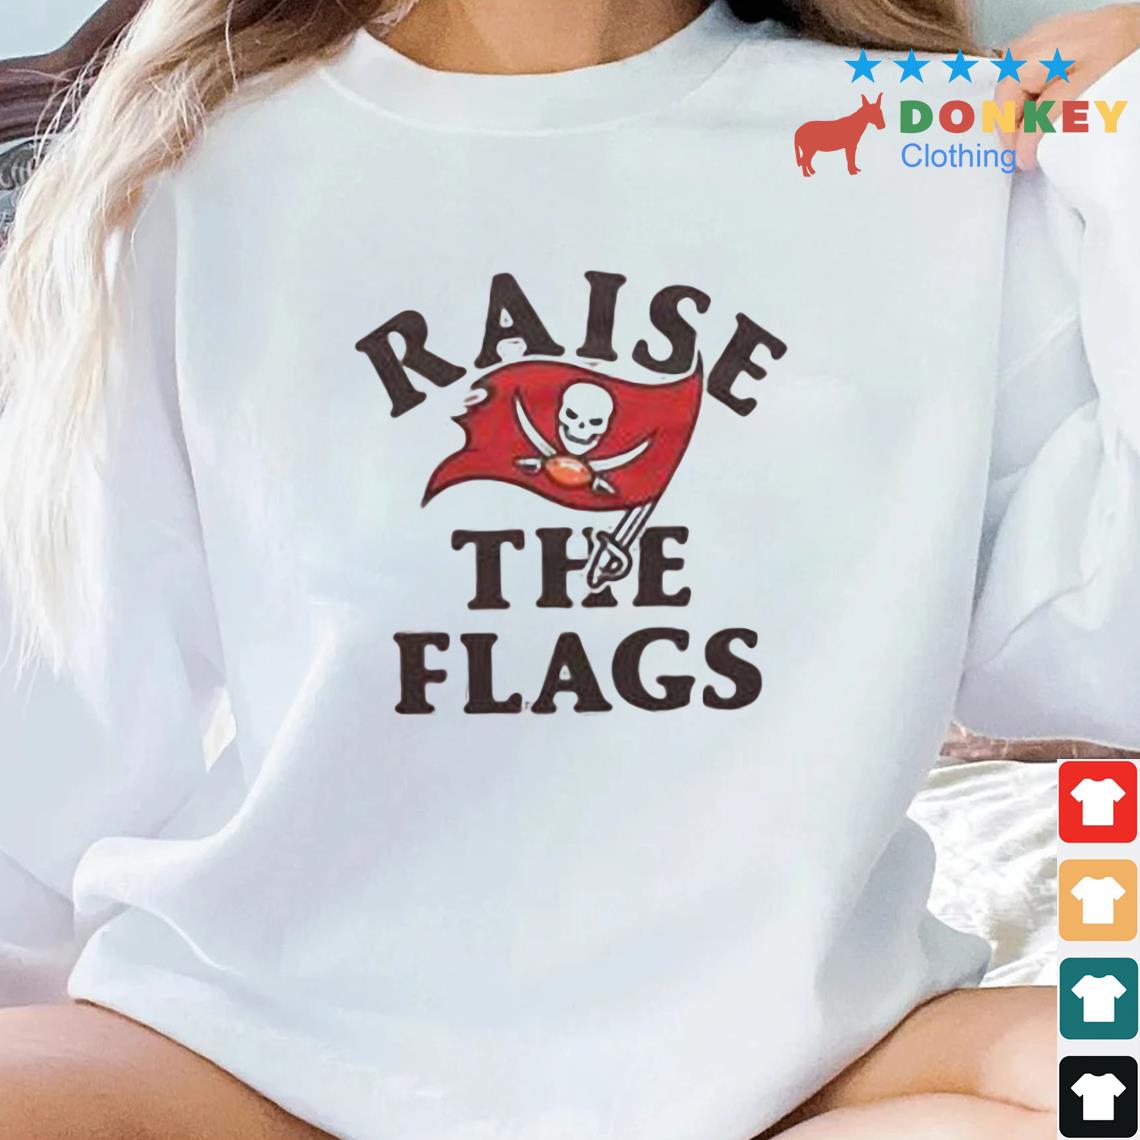 Tampa Bay Buccaneers Raise The Flags Shirt